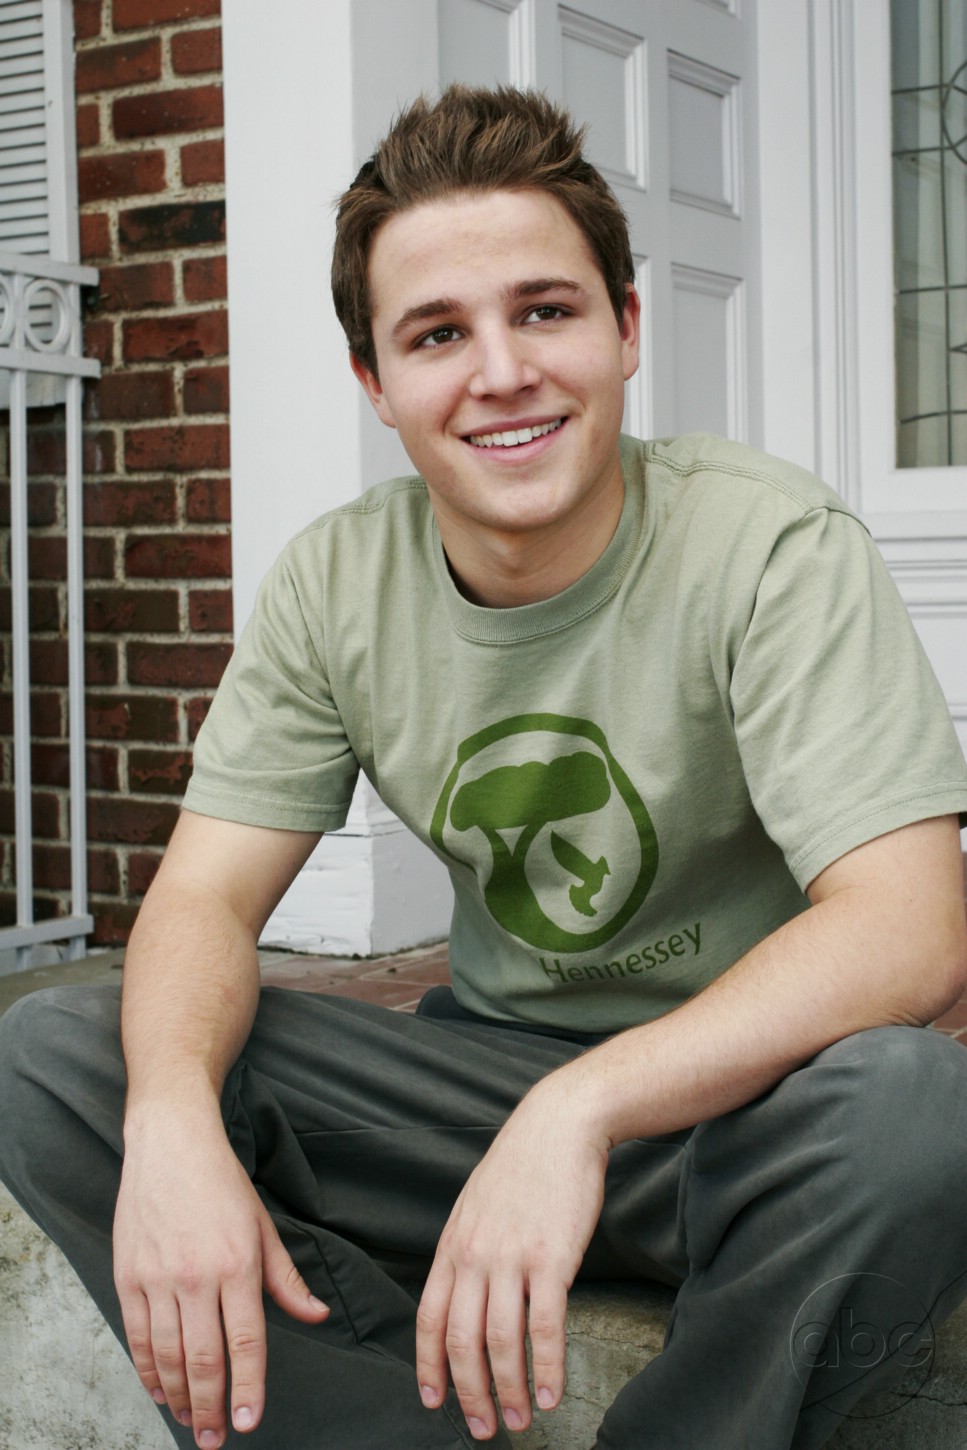 General photo of Shawn Pyfrom